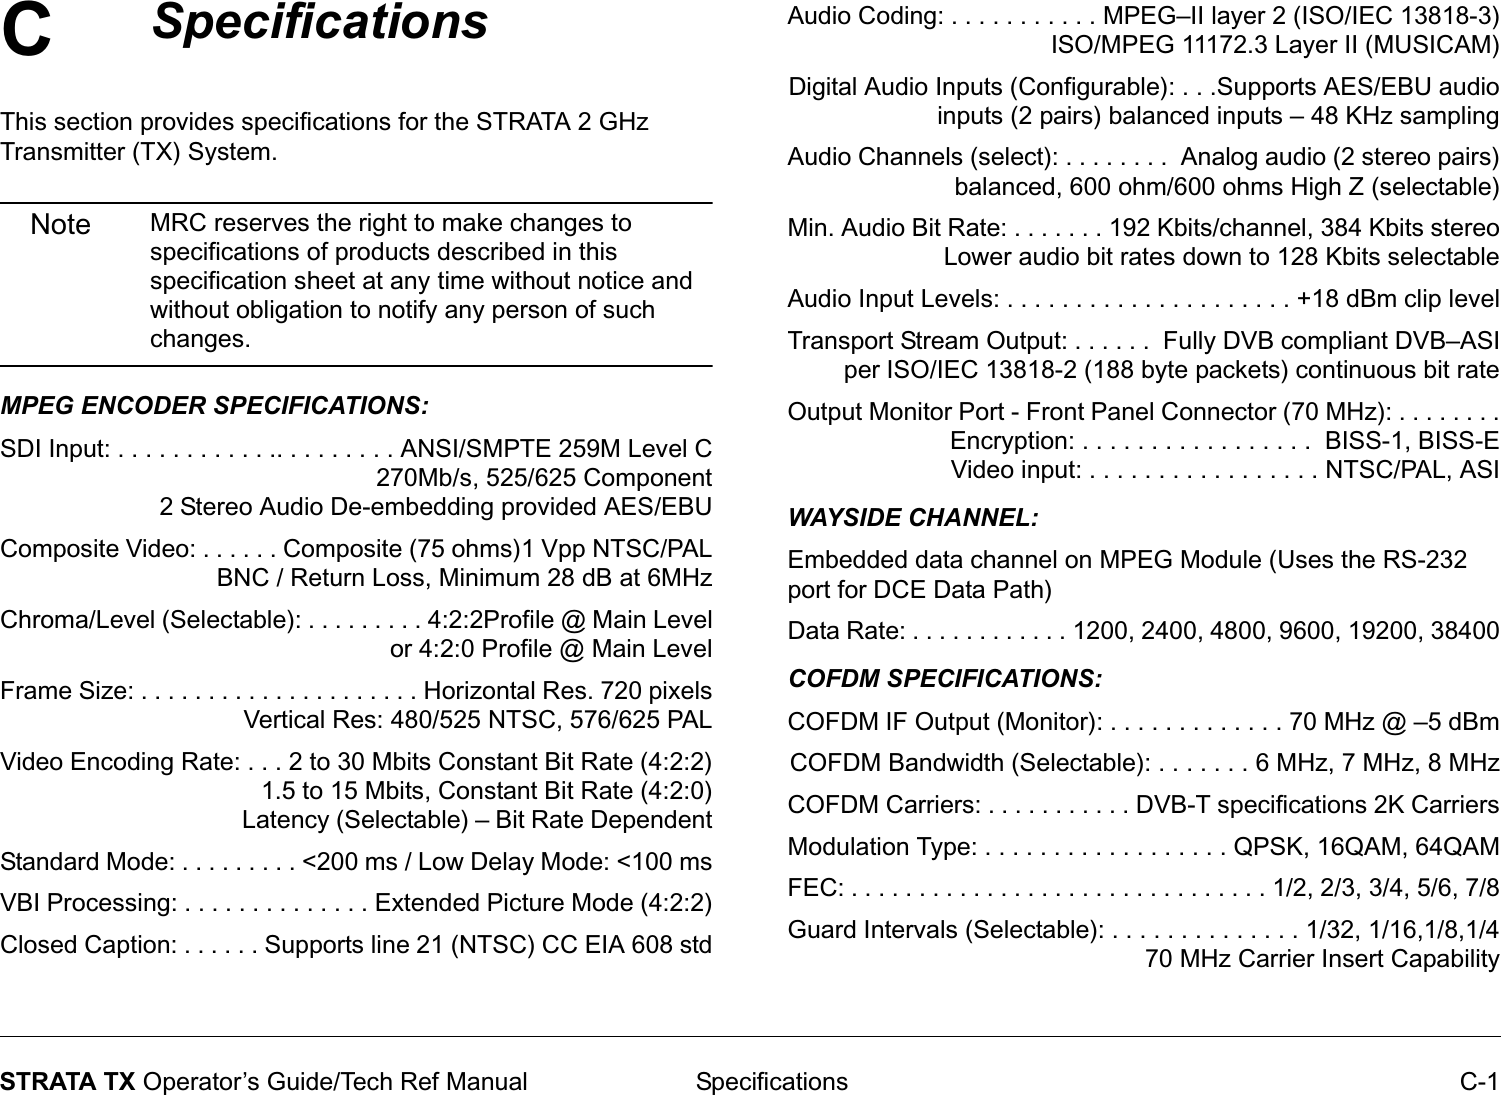 C Specifications C-1STRATA TX Operator’s Guide/Tech Ref ManualSpecifications This section provides specifications for the STRATA 2 GHz Transmitter (TX) System.Note MRC reserves the right to make changes to specifications of products described in this specification sheet at any time without notice and without obligation to notify any person of such changes.MPEG ENCODER SPECIFICATIONS:SDI Input: . . . . . . . . . . . .. . . . . . . . . ANSI/SMPTE 259M Level C270Mb/s, 525/625 Component2 Stereo Audio De-embedding provided AES/EBUComposite Video: . . . . . . Composite (75 ohms)1 Vpp NTSC/PALBNC / Return Loss, Minimum 28 dB at 6MHzChroma/Level (Selectable): . . . . . . . . . 4:2:2Profile @ Main Level or 4:2:0 Profile @ Main LevelFrame Size: . . . . . . . . . . . . . . . . . . . . . Horizontal Res. 720 pixelsVertical Res: 480/525 NTSC, 576/625 PALVideo Encoding Rate: . . . 2 to 30 Mbits Constant Bit Rate (4:2:2)                                      1.5 to 15 Mbits, Constant Bit Rate (4:2:0)                                      Latency (Selectable) – Bit Rate DependentStandard Mode: . . . . . . . . . &lt;200 ms / Low Delay Mode: &lt;100 msVBI Processing: . . . . . . . . . . . . . . Extended Picture Mode (4:2:2)Closed Caption: . . . . . . Supports line 21 (NTSC) CC EIA 608 stdAudio Coding: . . . . . . . . . . . MPEG–II layer 2 (ISO/IEC 13818-3)ISO/MPEG 11172.3 Layer II (MUSICAM)Digital Audio Inputs (Configurable): . . .Supports AES/EBU audioinputs (2 pairs) balanced inputs – 48 KHz samplingAudio Channels (select): . . . . . . . .  Analog audio (2 stereo pairs)balanced, 600 ohm/600 ohms High Z (selectable)Min. Audio Bit Rate: . . . . . . . 192 Kbits/channel, 384 Kbits stereo Lower audio bit rates down to 128 Kbits selectableAudio Input Levels: . . . . . . . . . . . . . . . . . . . . . +18 dBm clip levelTransport Stream Output: . . . . . .  Fully DVB compliant DVB–ASI per ISO/IEC 13818-2 (188 byte packets) continuous bit rateOutput Monitor Port - Front Panel Connector (70 MHz): . . . . . . . .Encryption: . . . . . . . . . . . . . . . . .  BISS-1, BISS-EVideo input: . . . . . . . . . . . . . . . . . NTSC/PAL, ASIWAYSIDE CHANNEL:Embedded data channel on MPEG Module (Uses the RS-232 port for DCE Data Path)Data Rate: . . . . . . . . . . . . 1200, 2400, 4800, 9600, 19200, 38400COFDM SPECIFICATIONS:COFDM IF Output (Monitor): . . . . . . . . . . . . . 70 MHz @ –5 dBmCOFDM Bandwidth (Selectable): . . . . . . . 6 MHz, 7 MHz, 8 MHzCOFDM Carriers: . . . . . . . . . . . DVB-T specifications 2K CarriersModulation Type: . . . . . . . . . . . . . . . . . . QPSK, 16QAM, 64QAMFEC: . . . . . . . . . . . . . . . . . . . . . . . . . . . . . . . 1/2, 2/3, 3/4, 5/6, 7/8Guard Intervals (Selectable): . . . . . . . . . . . . . . 1/32, 1/16,1/8,1/470 MHz Carrier Insert Capability